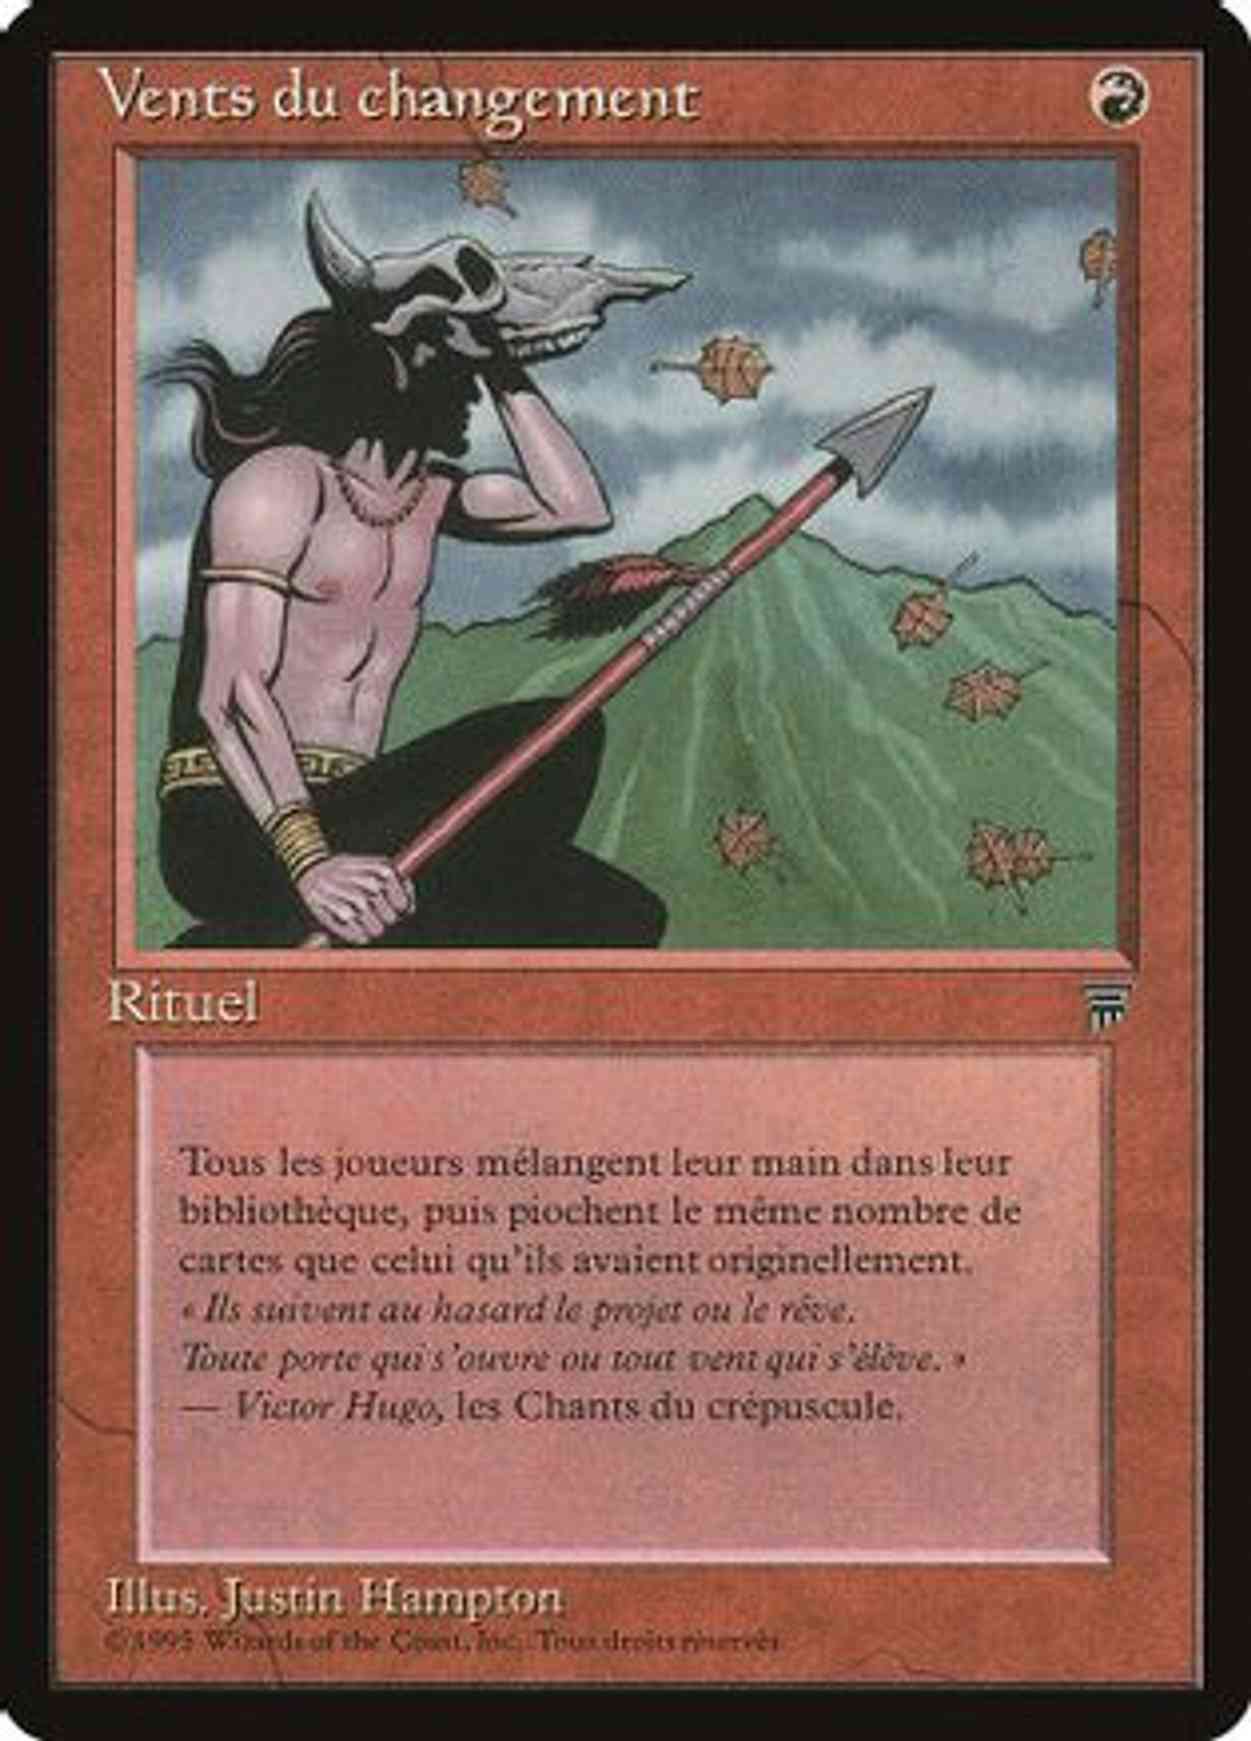 Winds of Change (French) - "Vents due changement" magic card front